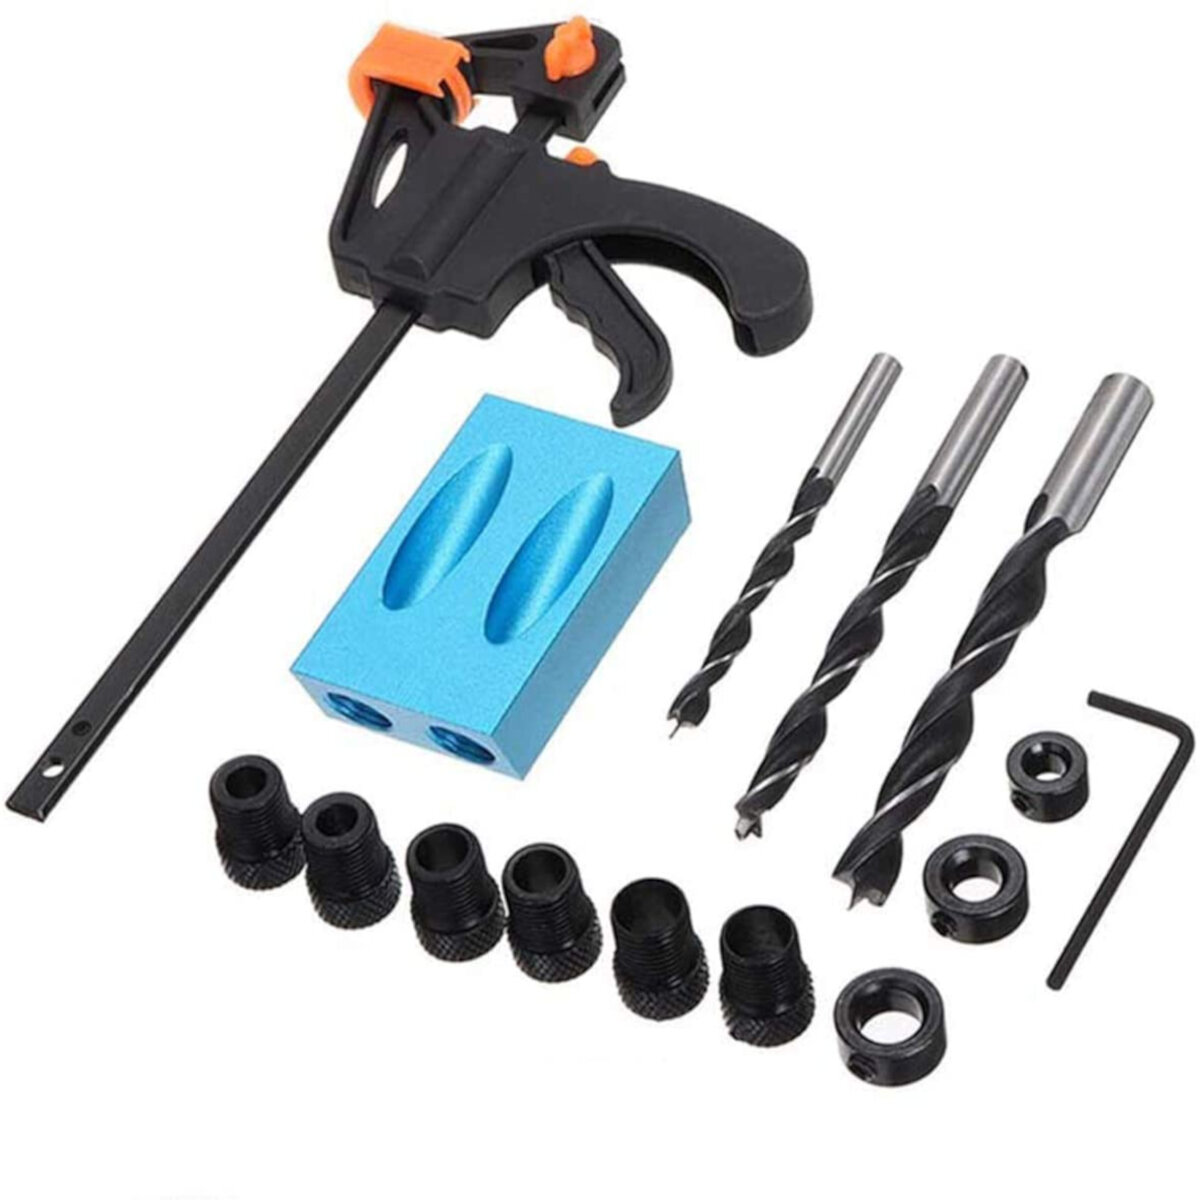 

15Pcs 15 Degree Pocket Hole Jig Kit Drilling Locator Woodworking Guide Screw Drill Angle Positioning Wood Plugs Oblique